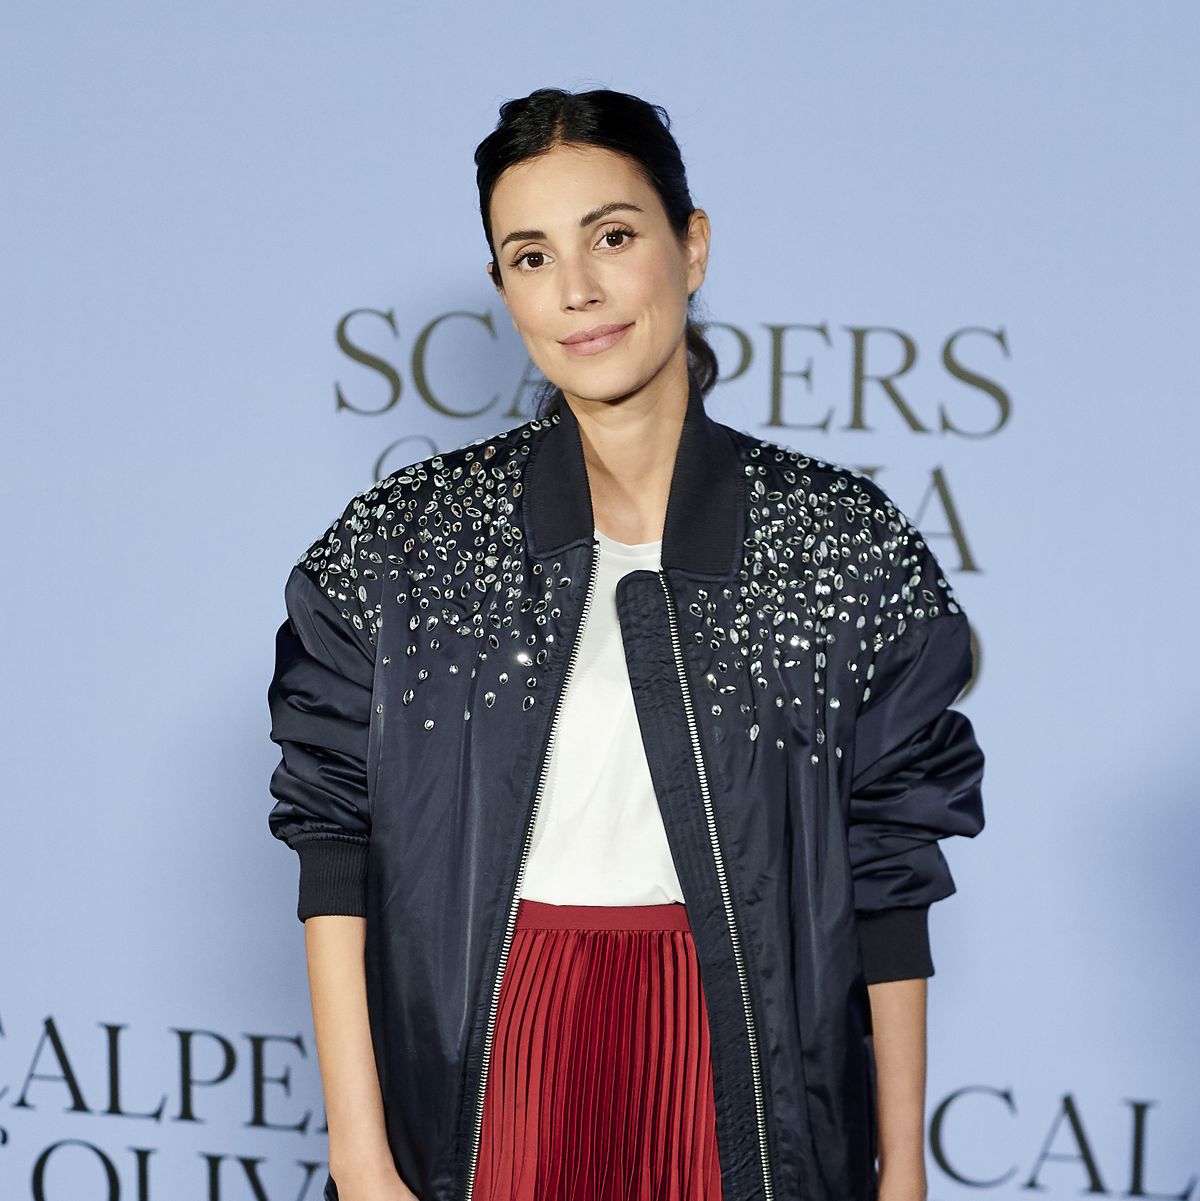 olivia palermo presents scalpers exclusive collection in madrid